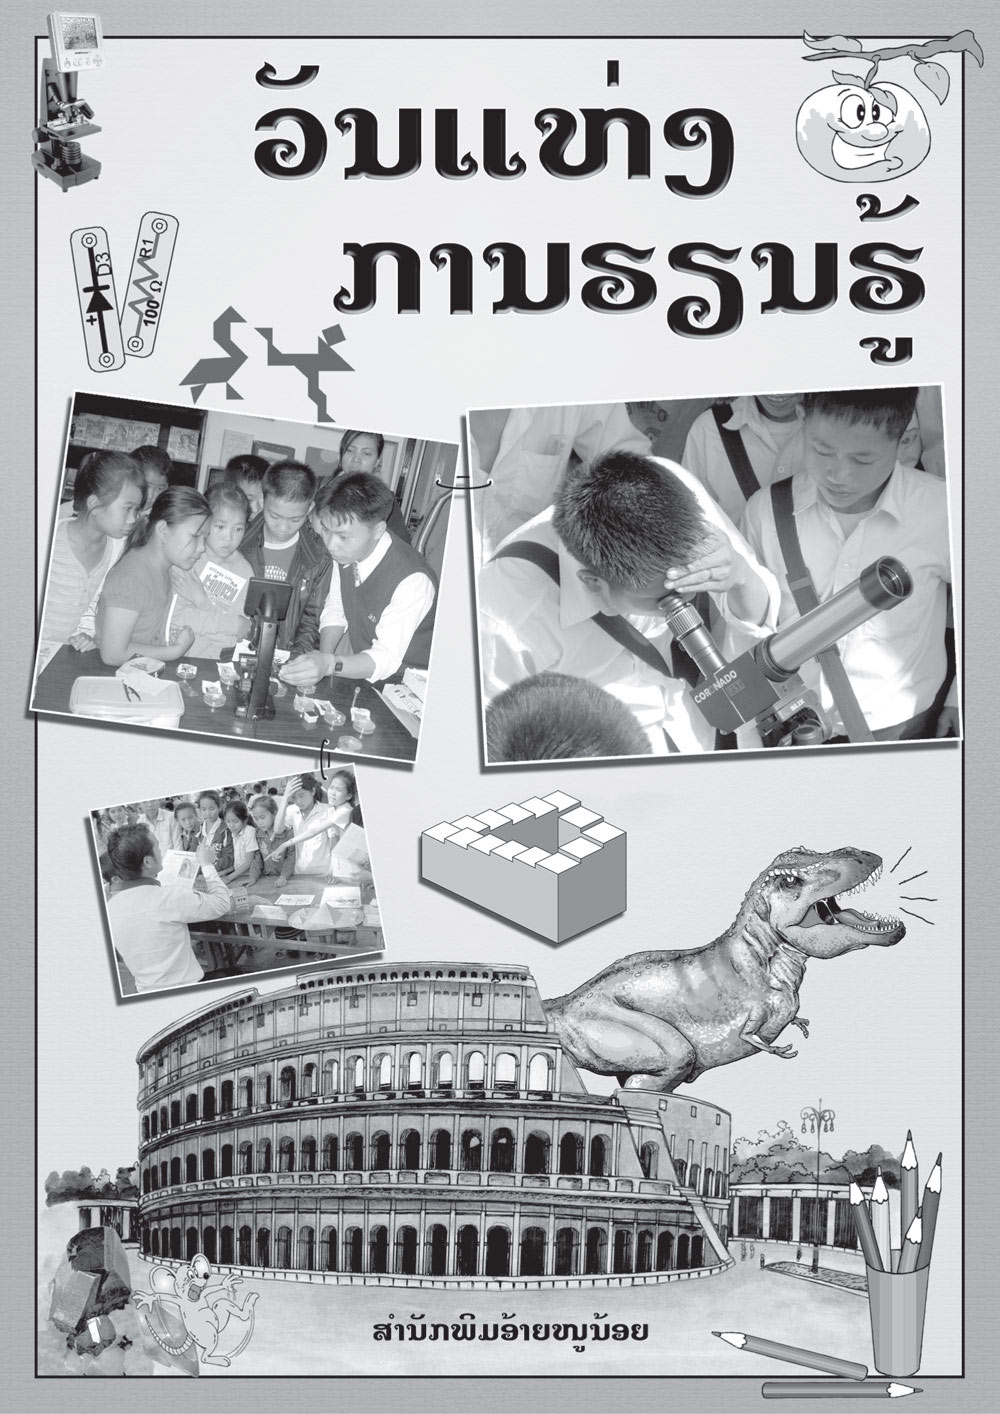 Discovery Day Book Grades 9-12 large book cover, published in Lao language